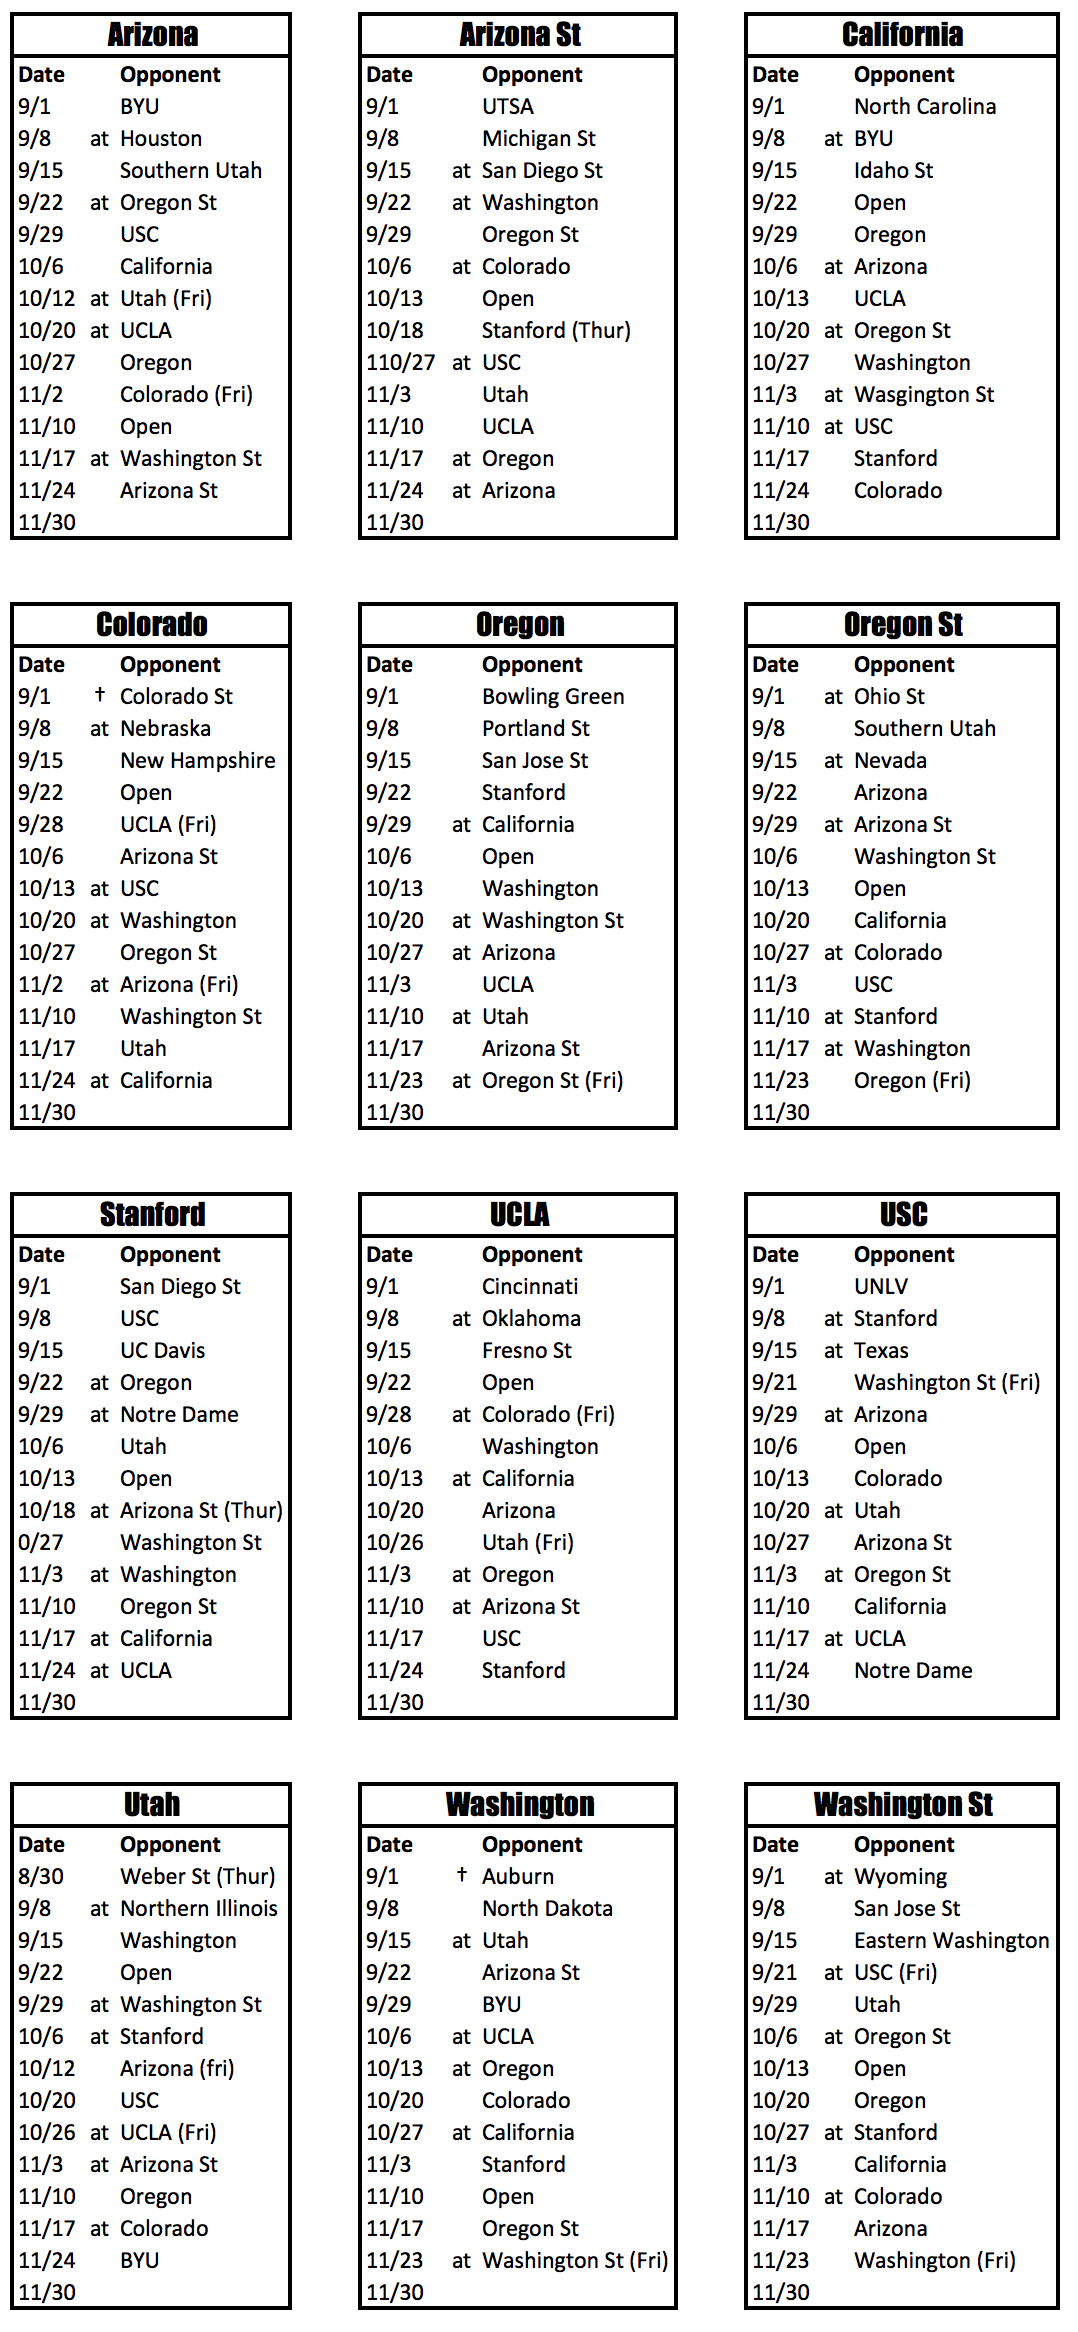 PAC-12 2018 Football Schedules.